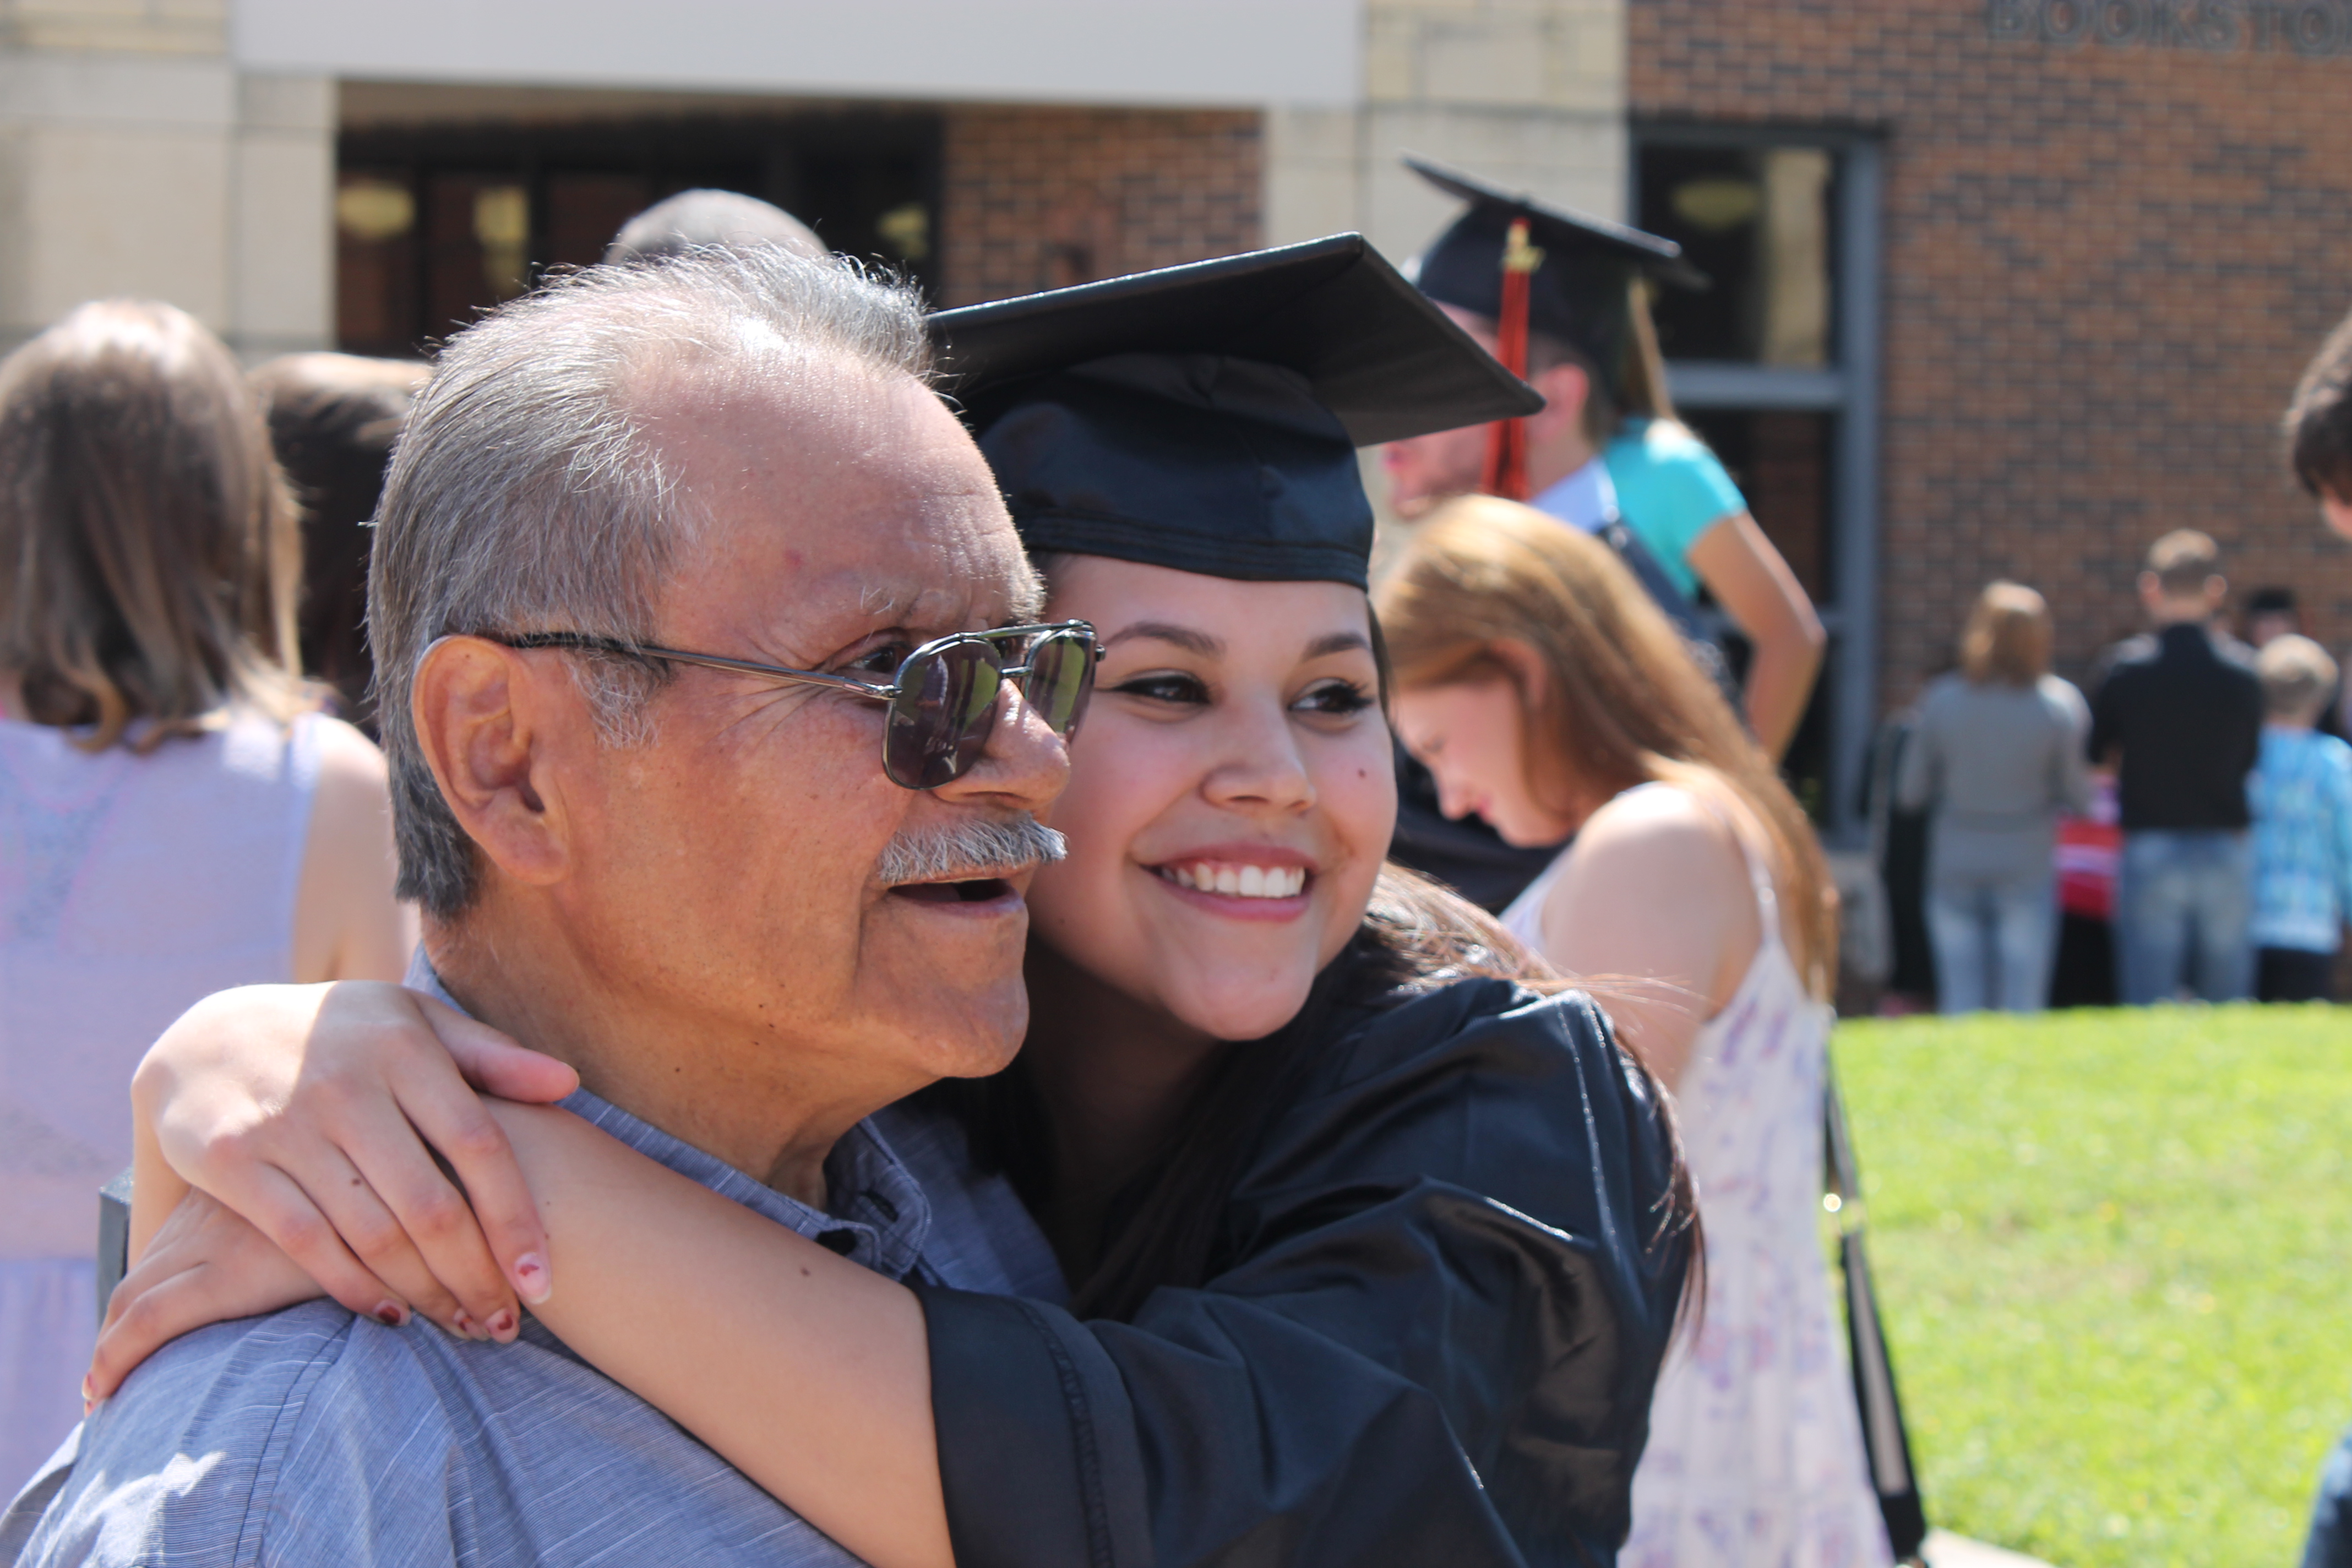 Two people hugging at a graduation